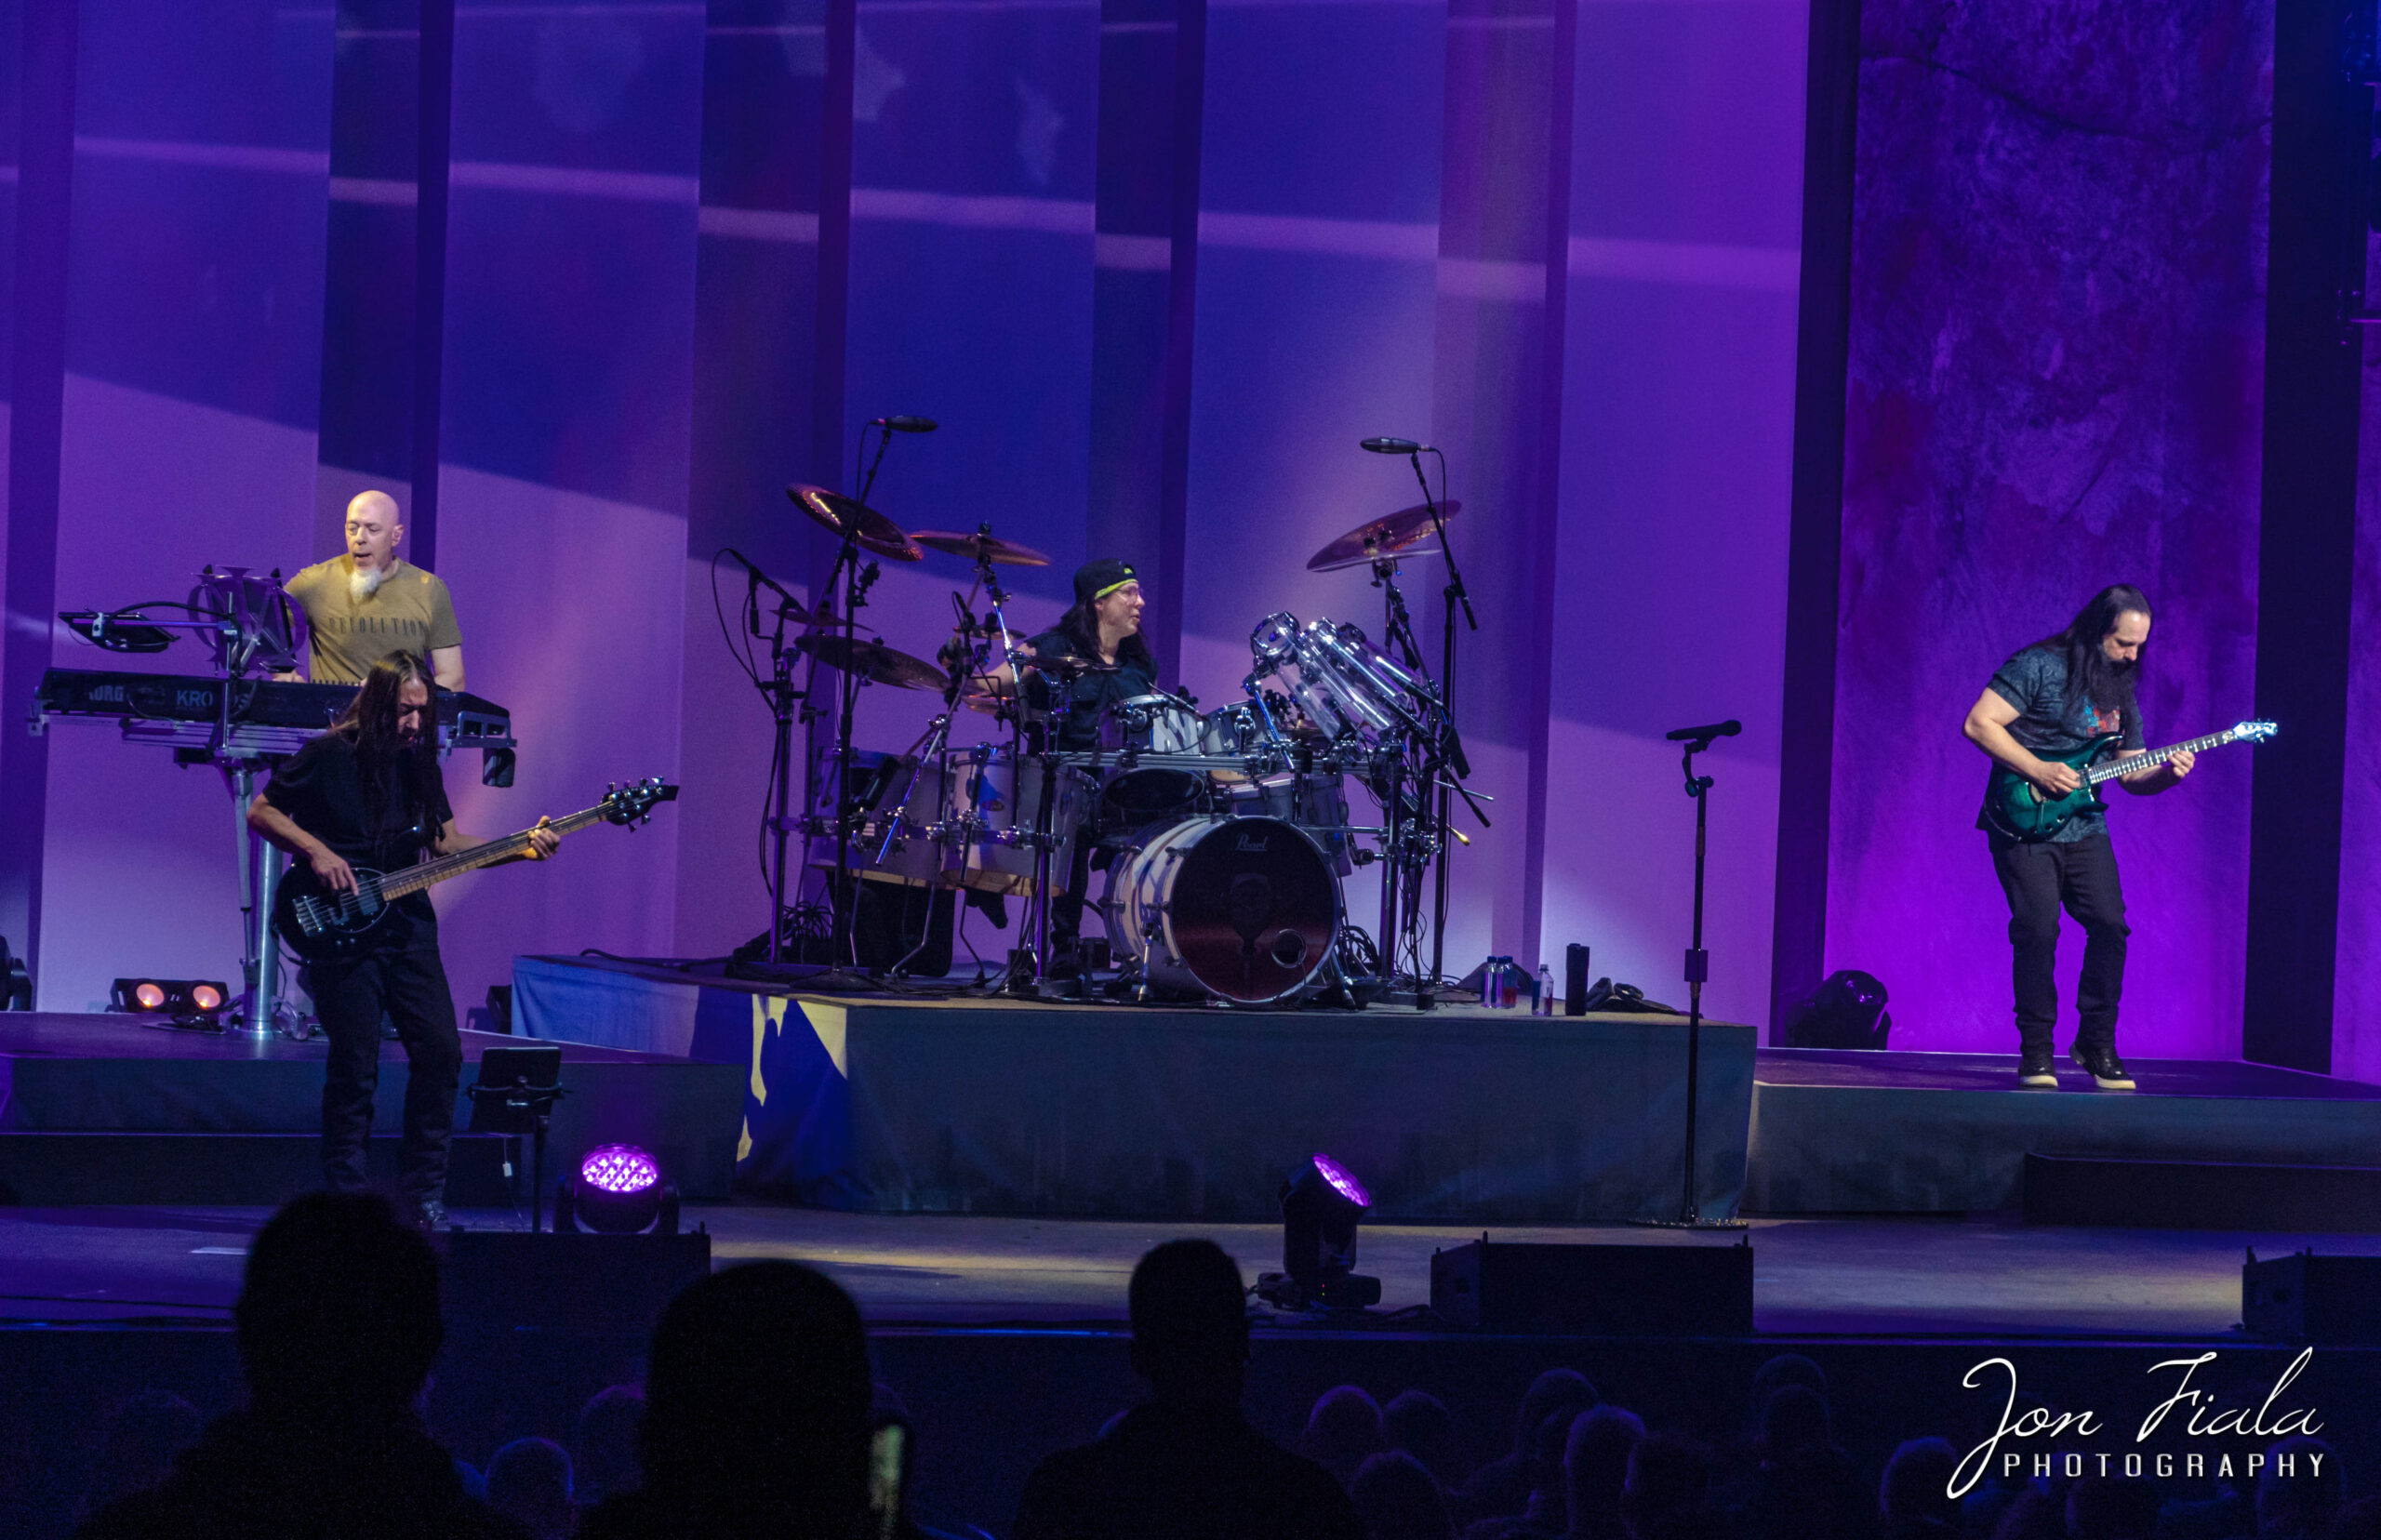 Concert Review: Dream Theater - Top Of The World - Louis, MO 2-15-22 - The Report